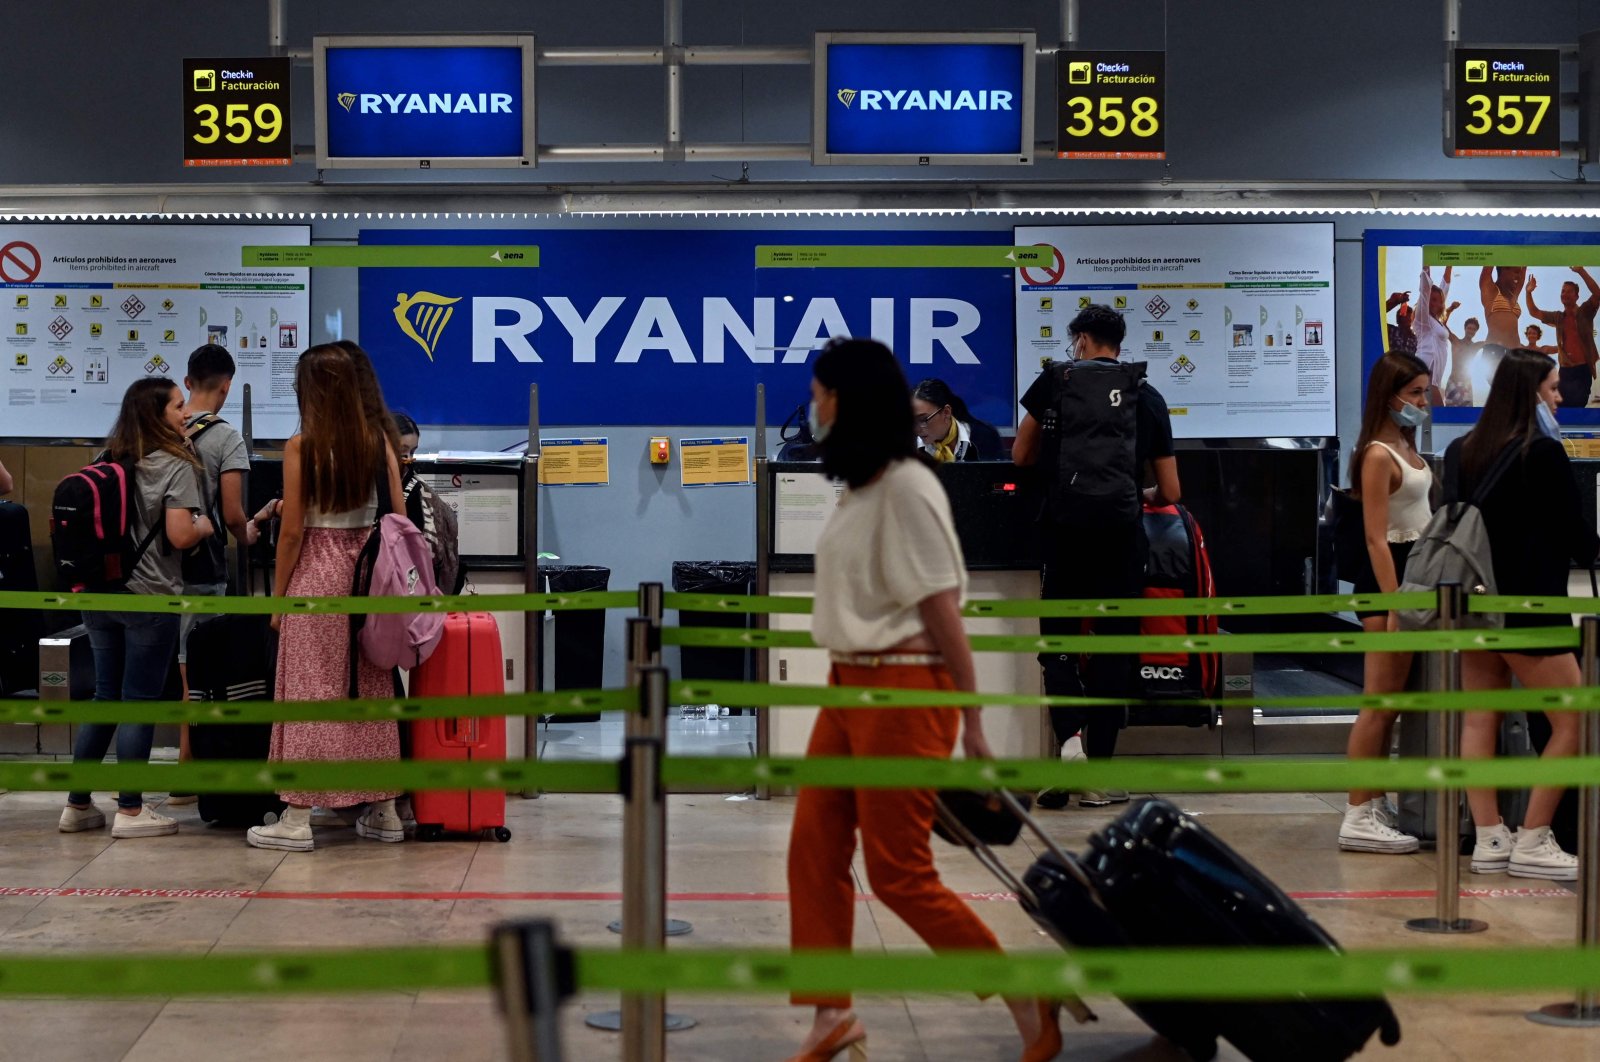 Passengers stand near the Ryanair check-in counters during a strike at Adolfo Suarez Madrid Barajas airport in Madrid, Spain, June 24, 2022. (AFP Photo)